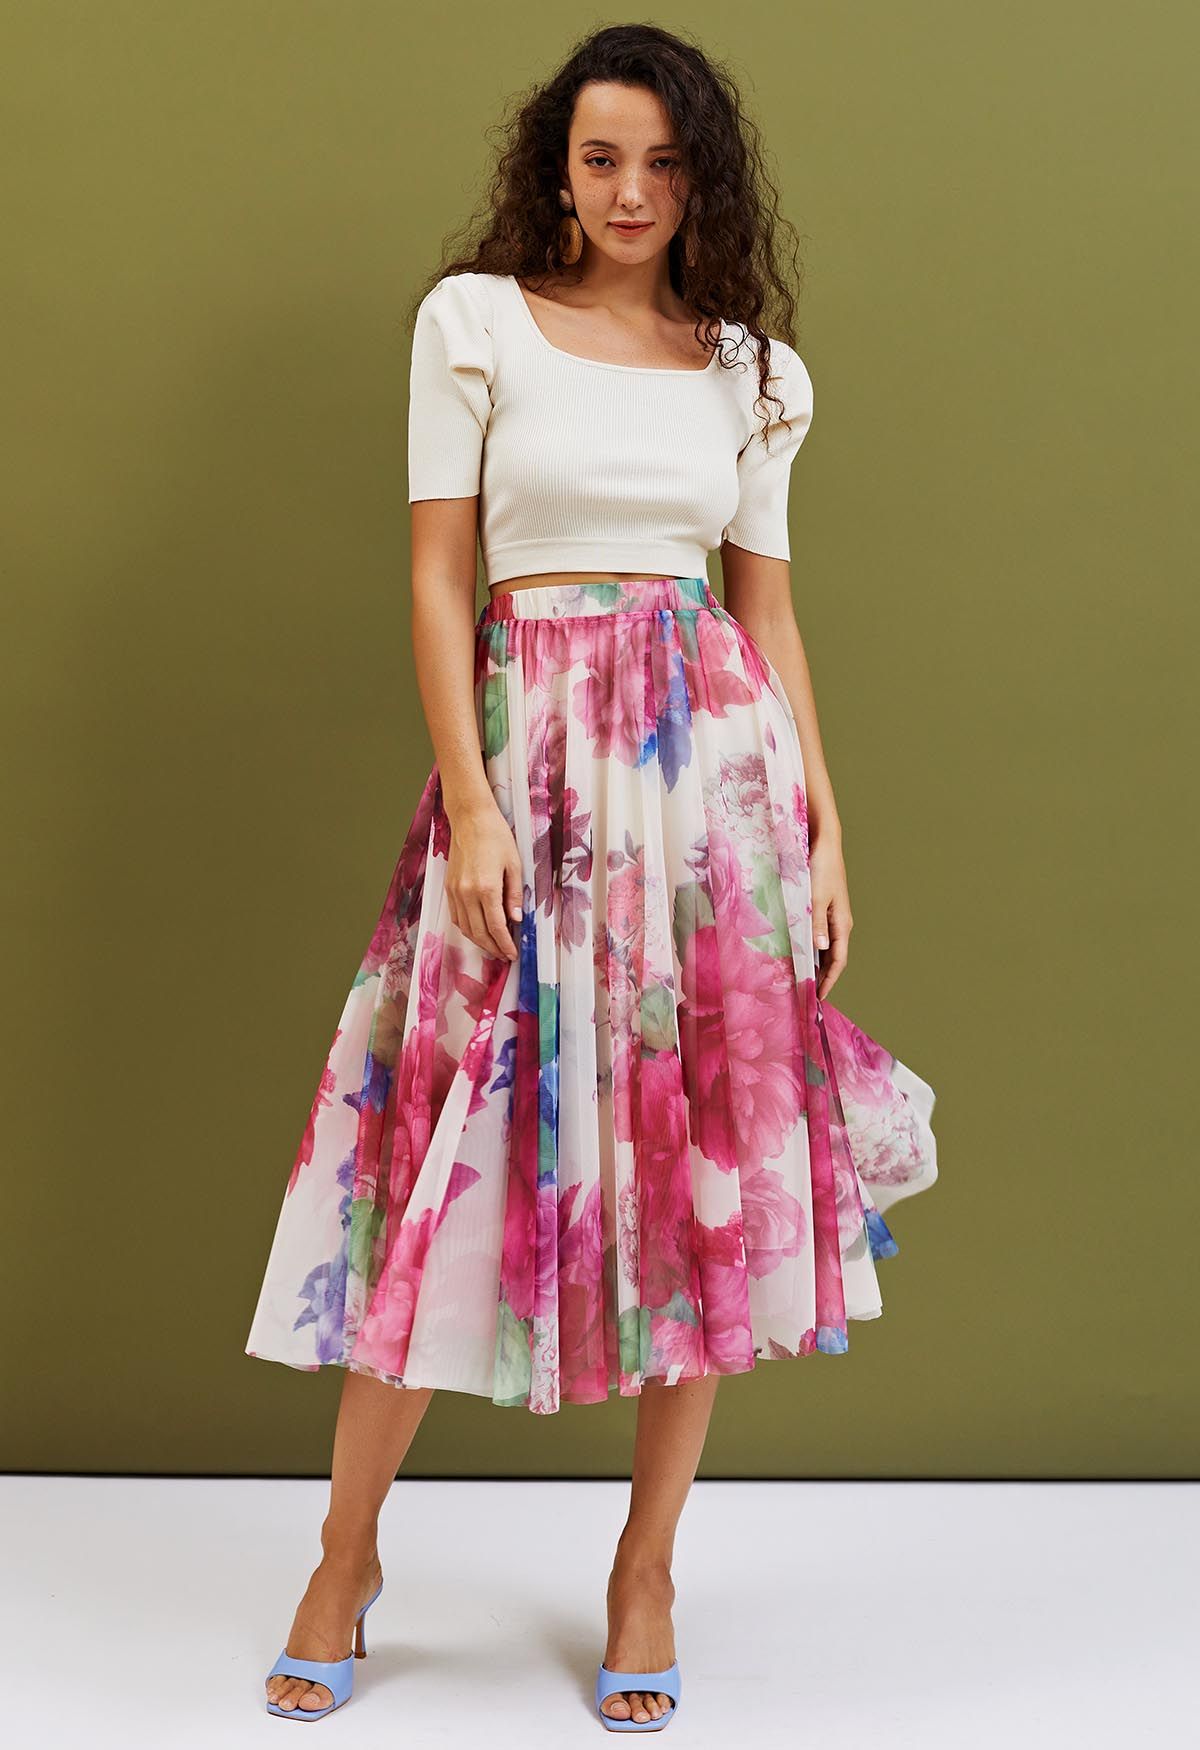 Chicwish - Swooning? We get it! This layered tulle skirt in a